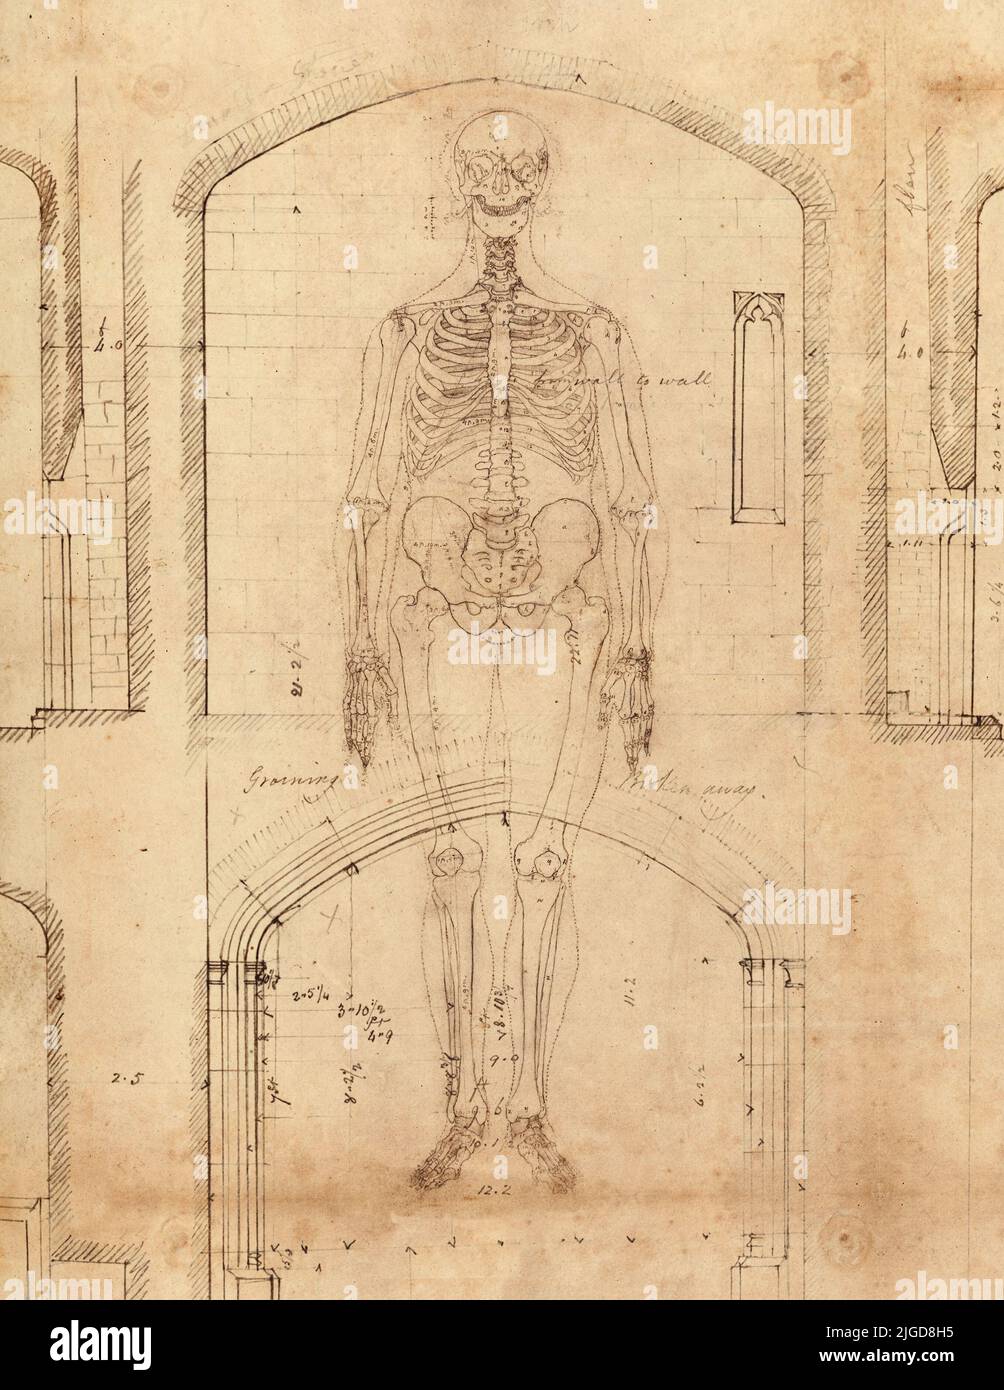 Classical anatomy and architectural sketches overlaid together creating a window to the body. Stock Photo